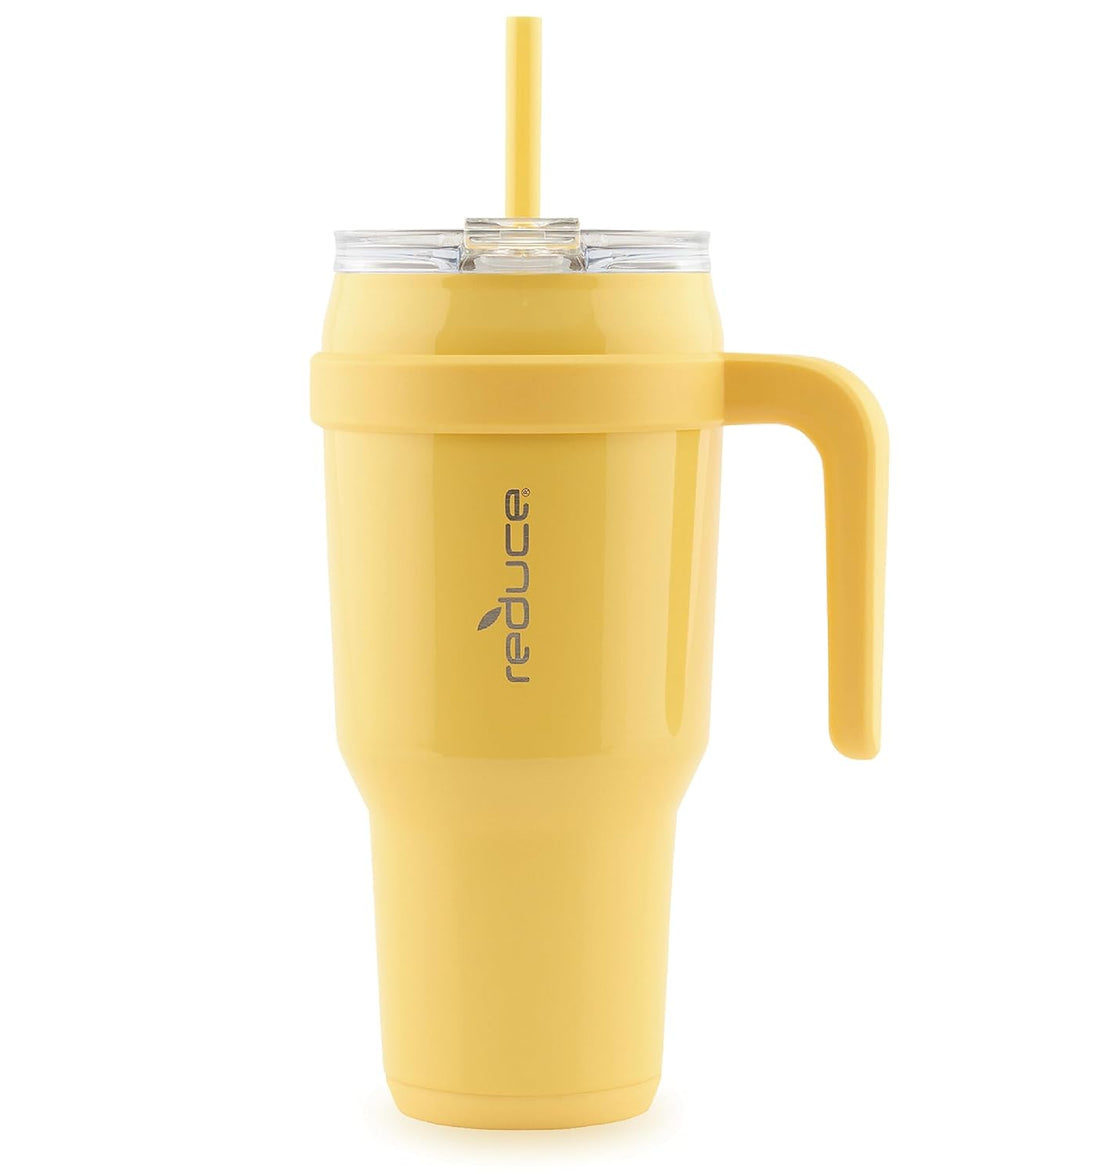 REDUCE Cold1 40 oz Tumbler with Handle - Vacuum Insulated Stainless Steel Water Bottle for Home, Office or Car, Reusable Mug with Straw or Leakproof Flip Lid, Keeps Drinks Cold All Day-Gloss Pineapple